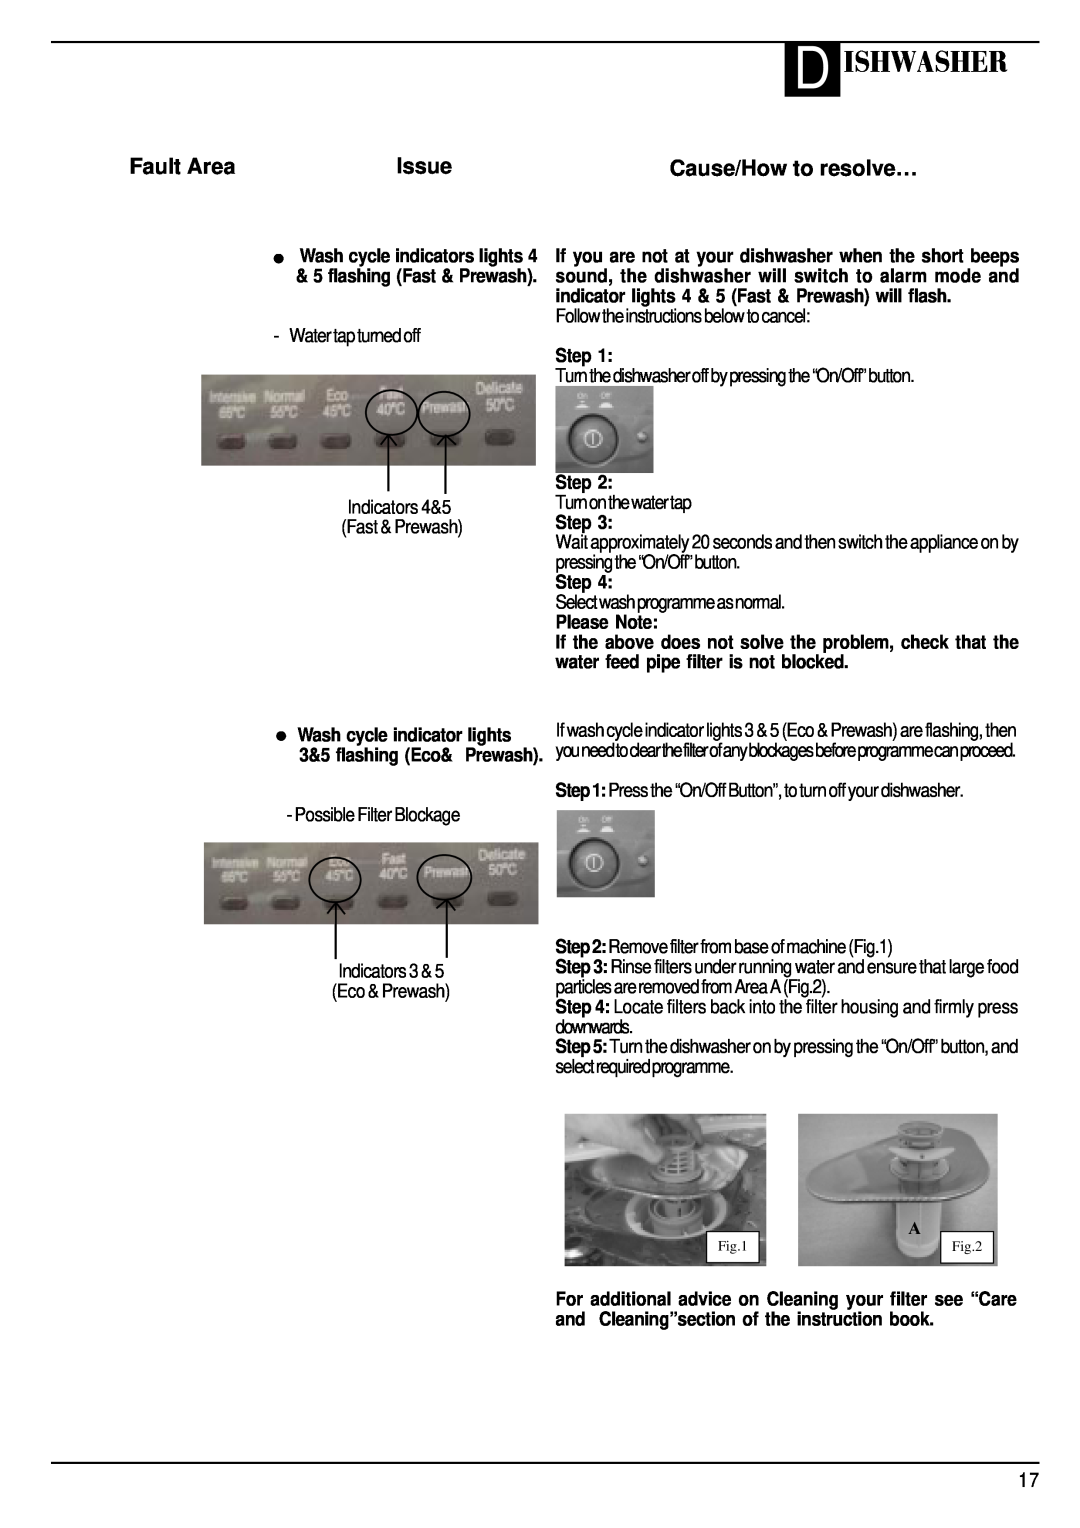 Hotpoint FDW60, FDW65 manual D Ishwasher, Fault Area, Issue, Cause/How to resolve…, Step, Please Note 